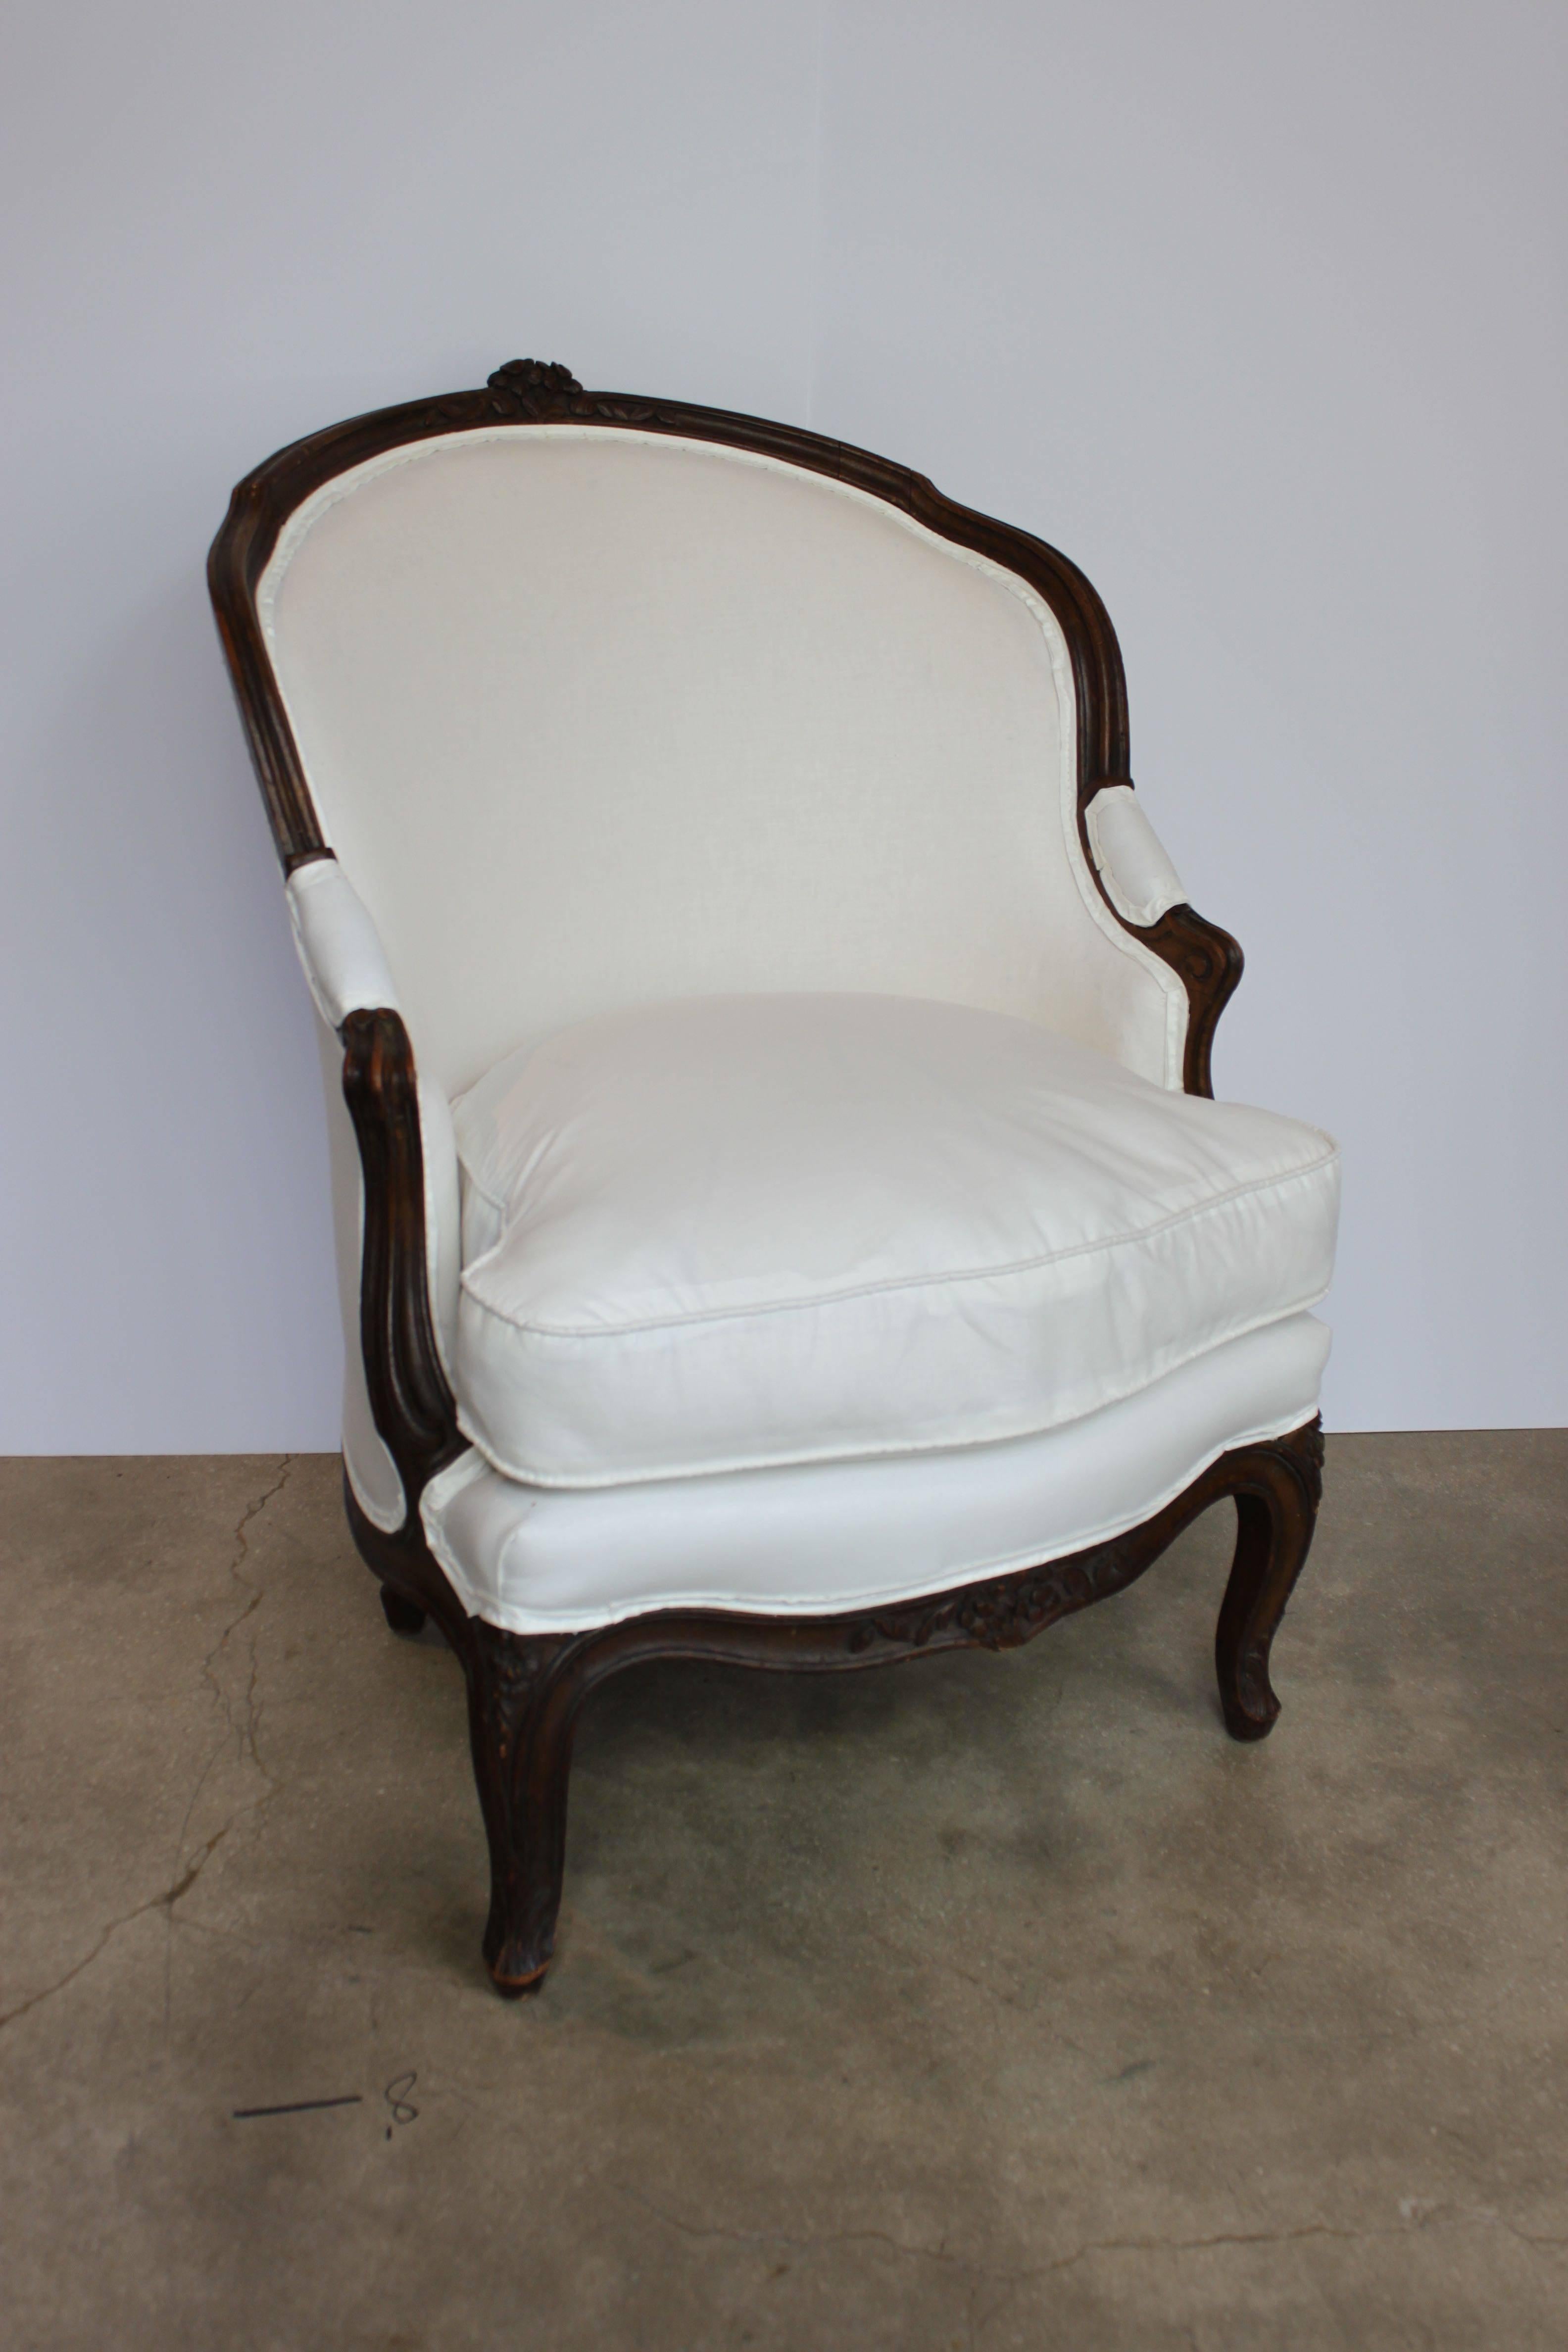 Oval back dark walnut Louis XVI style carved wood bergere that has been newly-upholstered in muslin. The chair shows minor wear on the legs but is in sturdy condition, France, late 19th century.